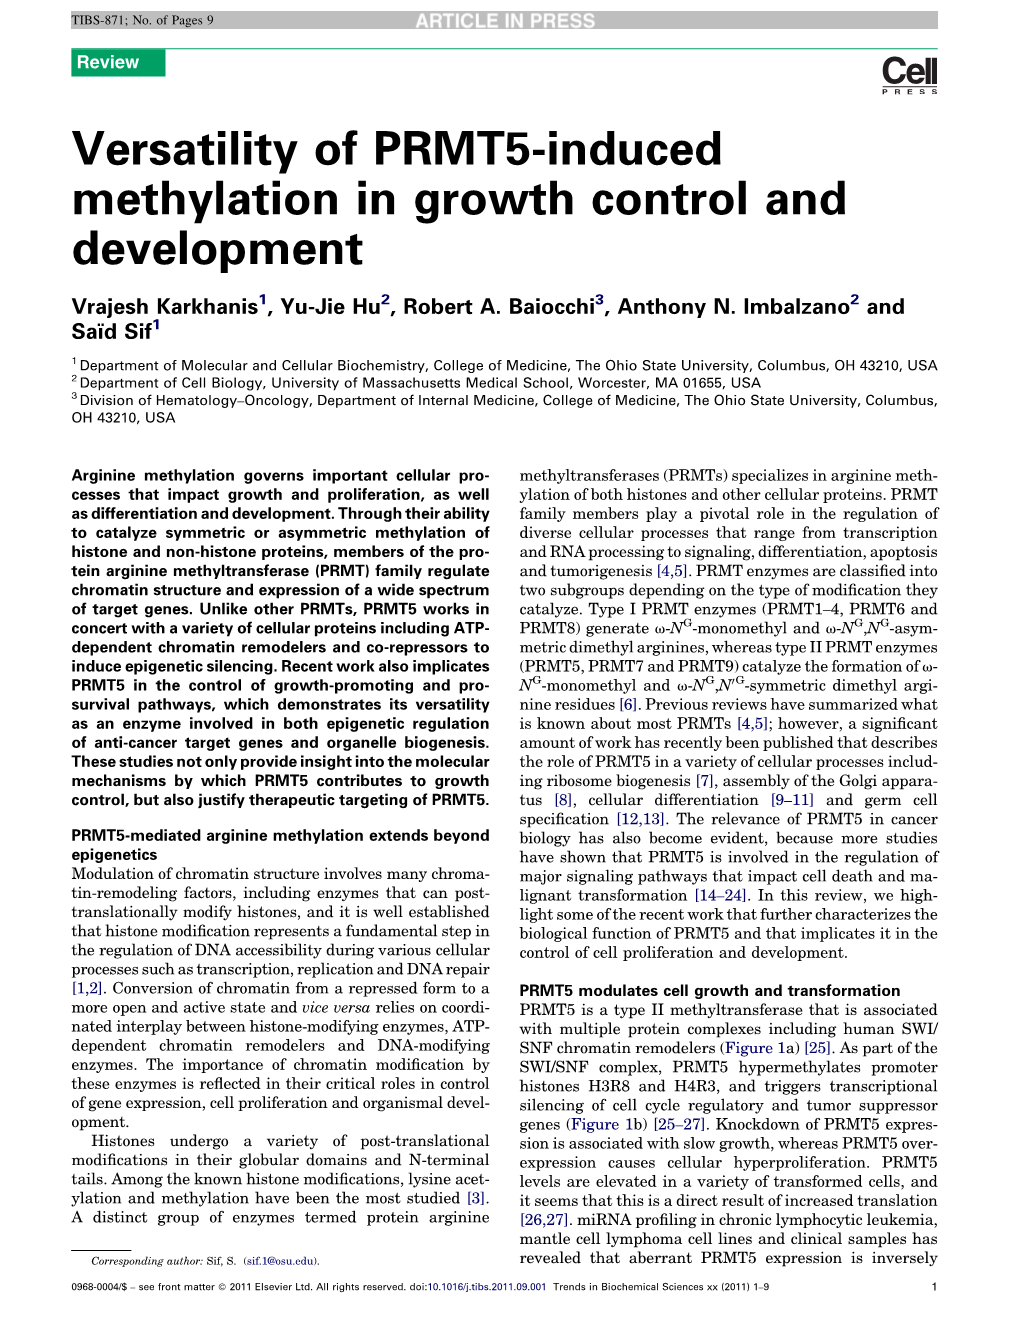 Versatility of PRMT5-Induced Methylation in Growth Control And